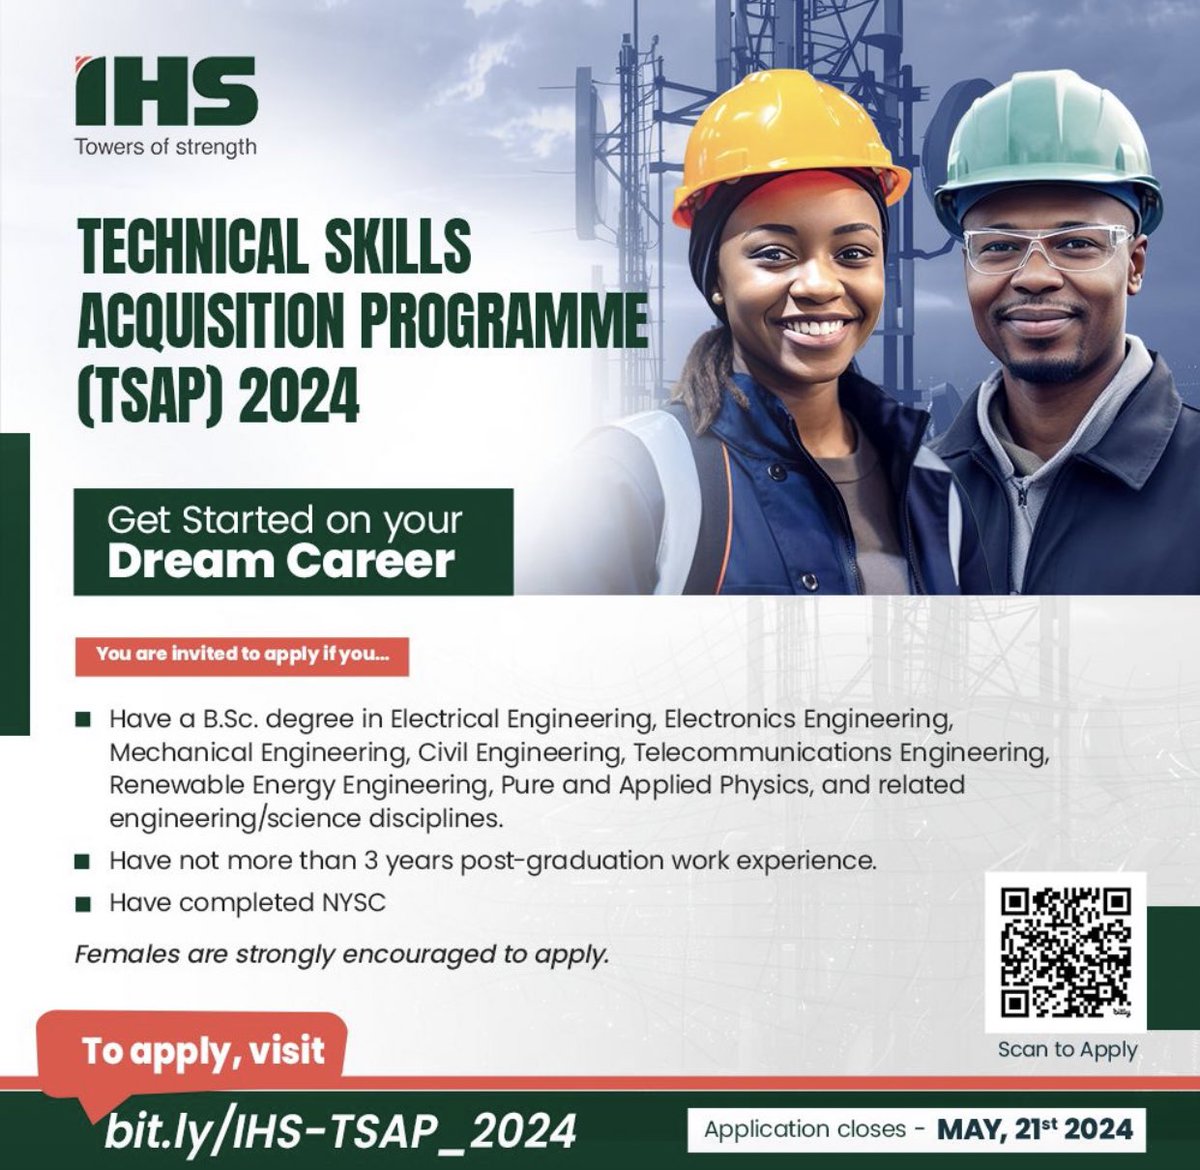 IHS has applications open for its Technical Skills Acquisition program. form.typeform.com/to/UMcZNgCG?ty…